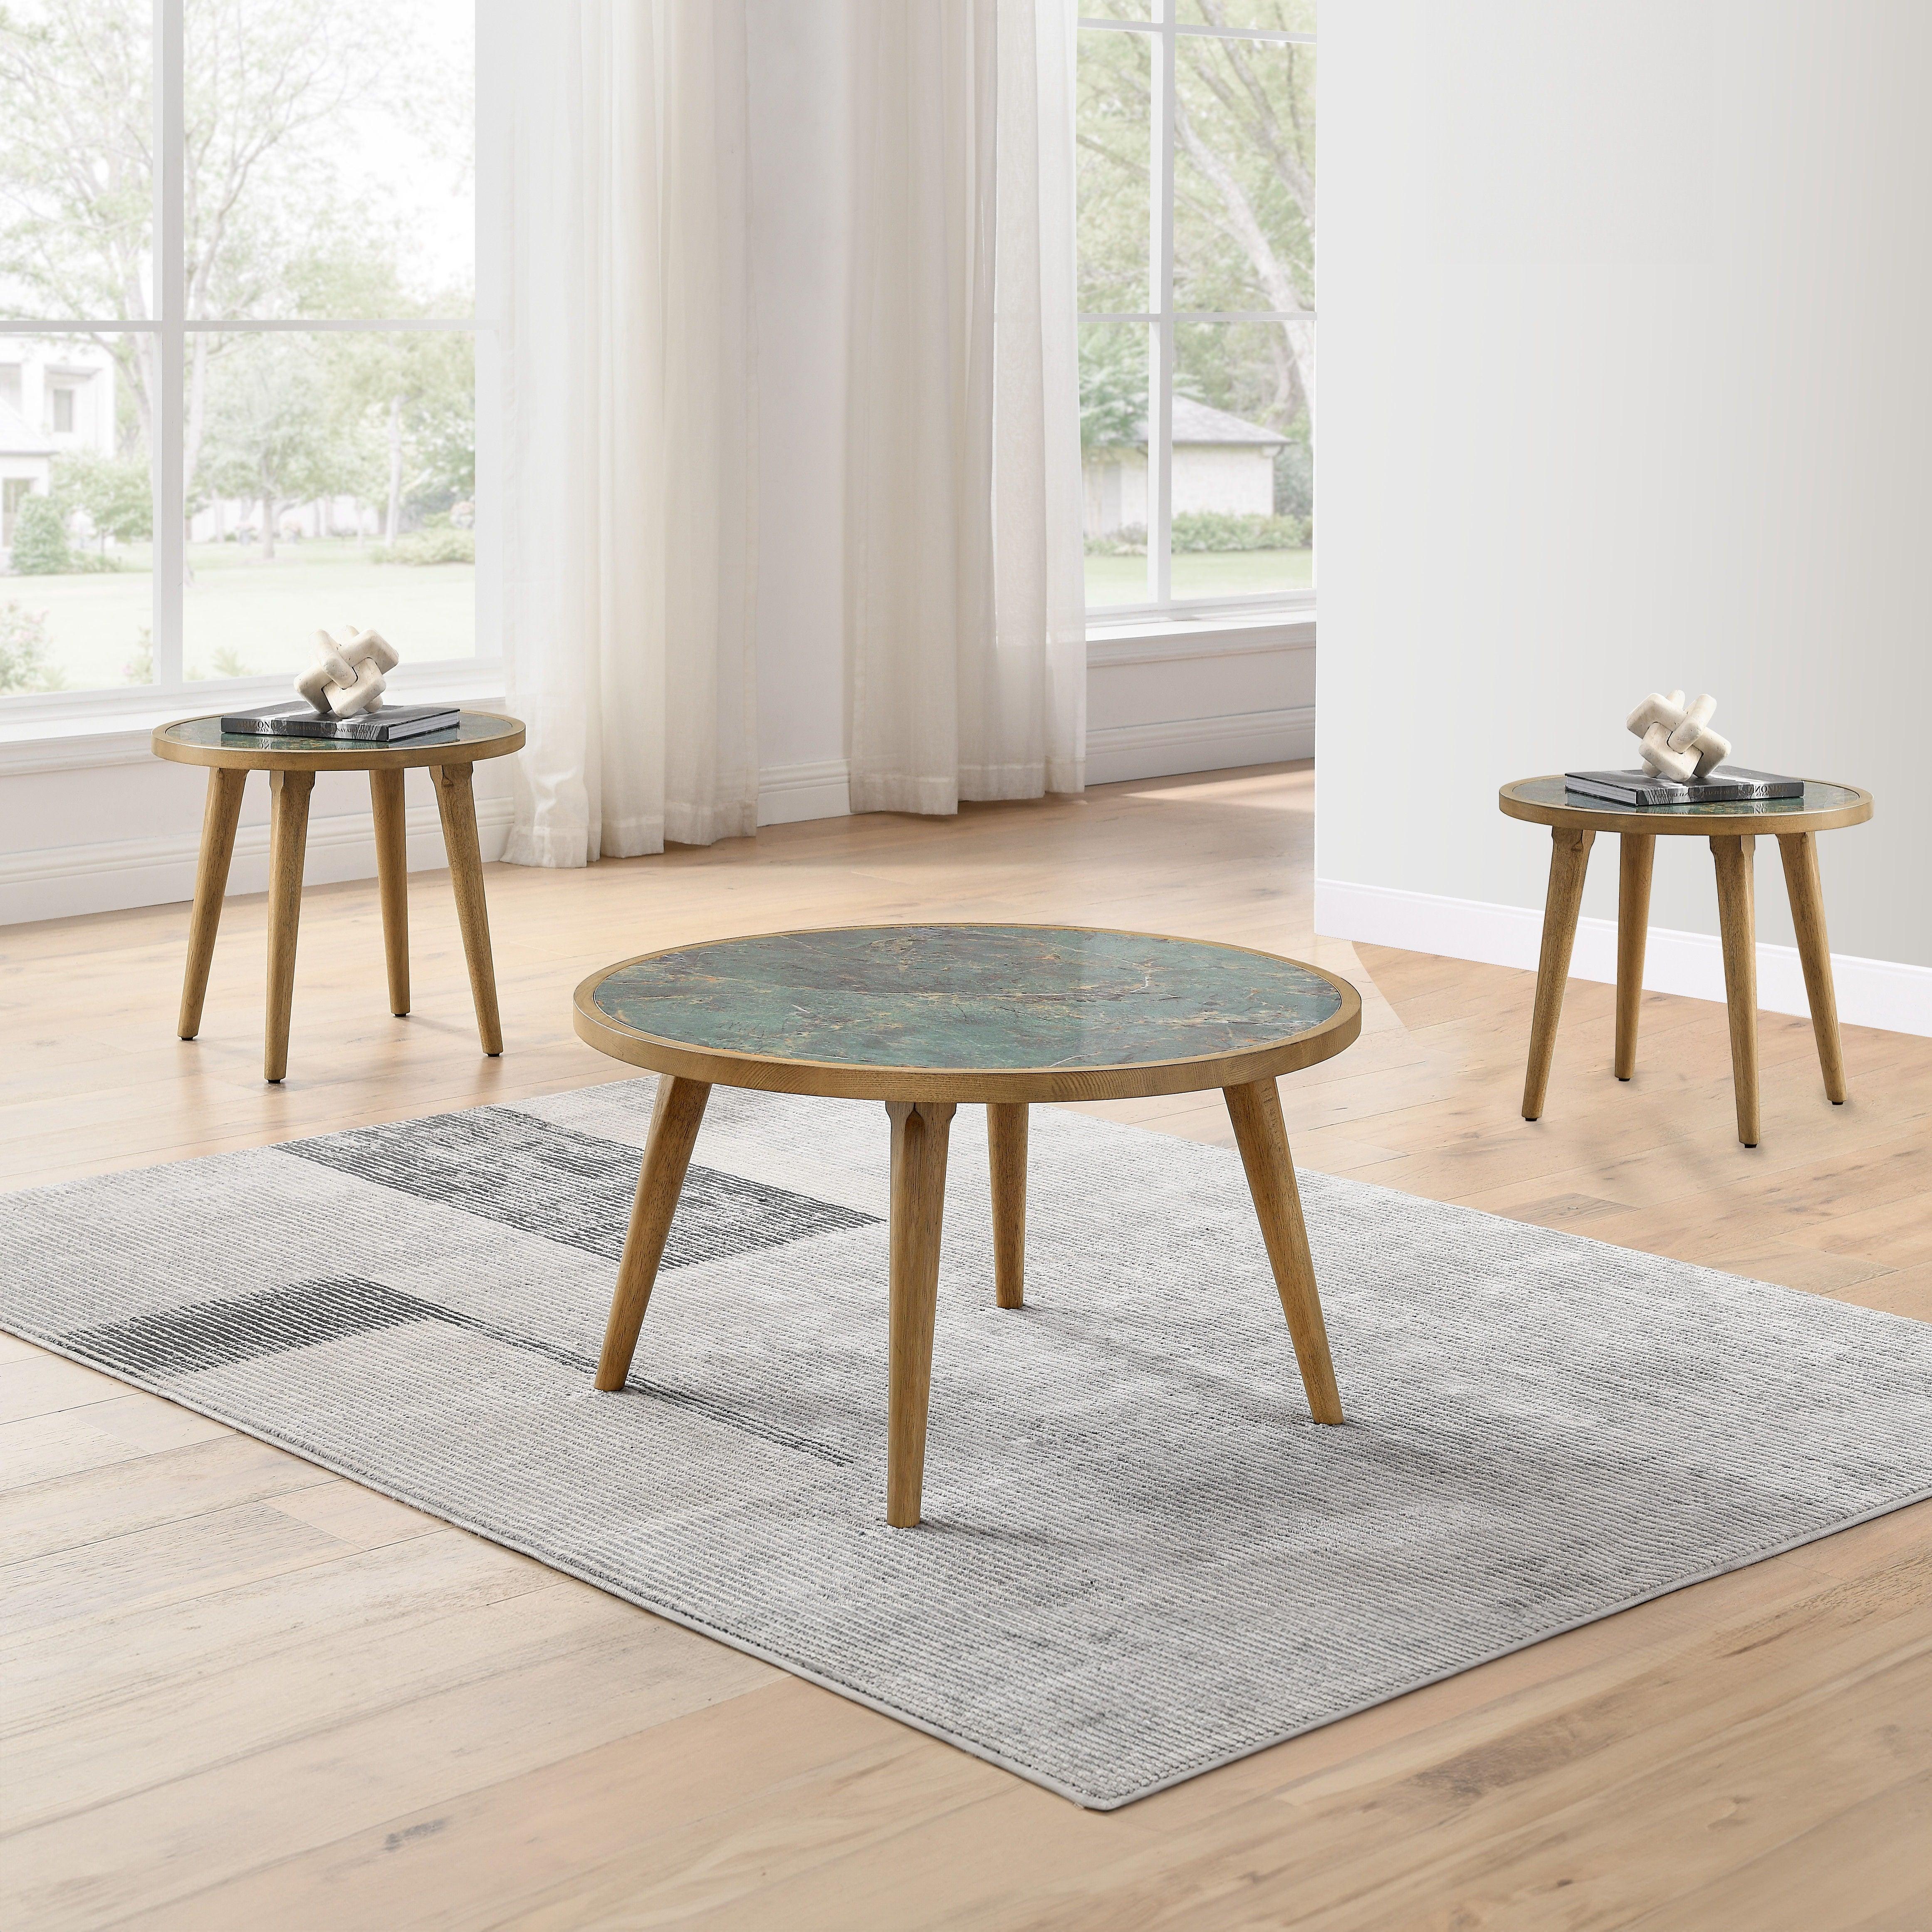 Steve Silver Furniture - Novato - 3 Piece Sintered Stone Table Set (Cocktail Table & 2 End Tables) - Green / Light Brown - 5th Avenue Furniture